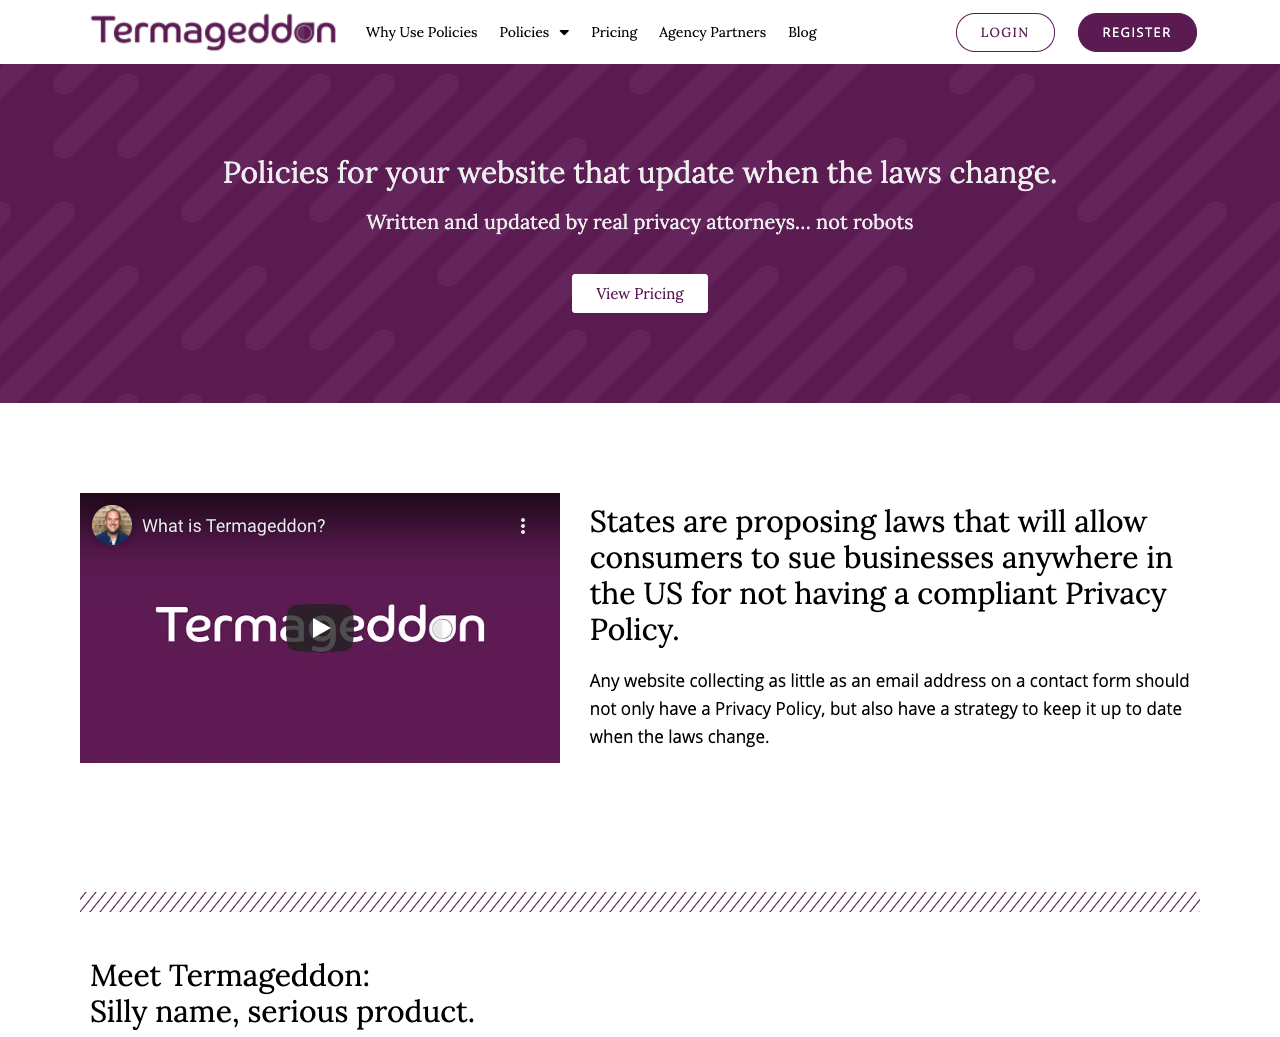 the homepage of Termageddon a policy generator service for privacy and terms of use policies.